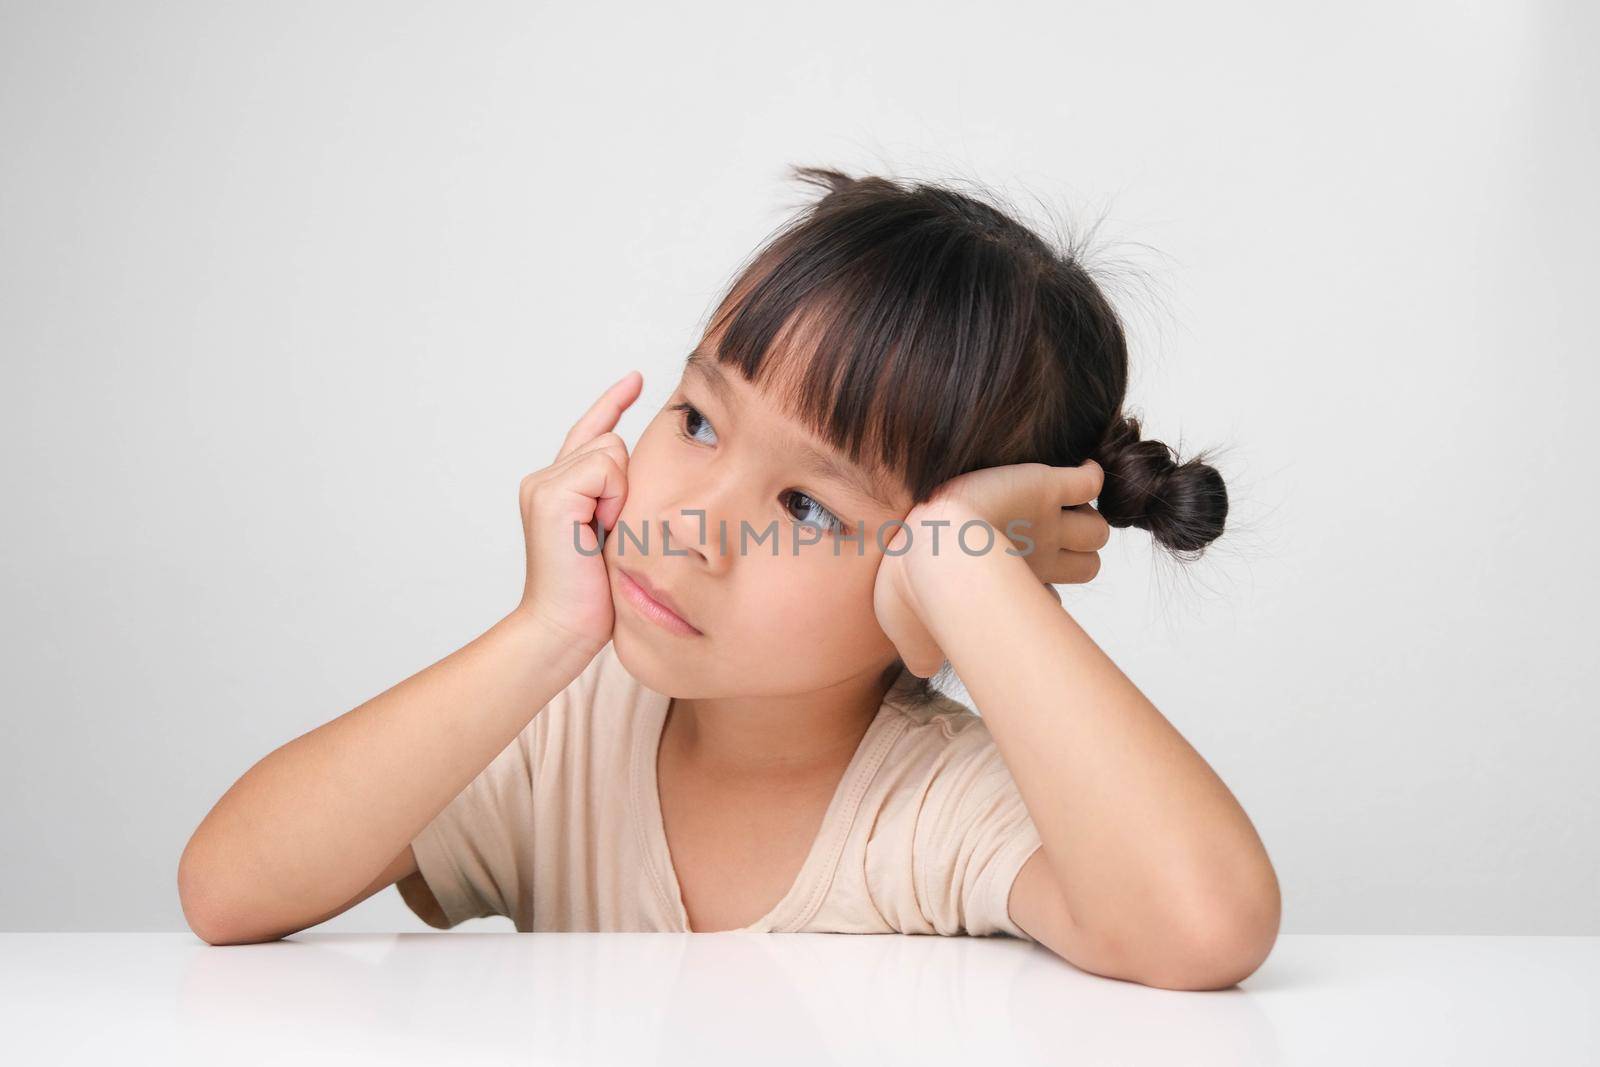 Cute dark haired little girl making a thoughtful pose sitting at a table on a white background. by TEERASAK